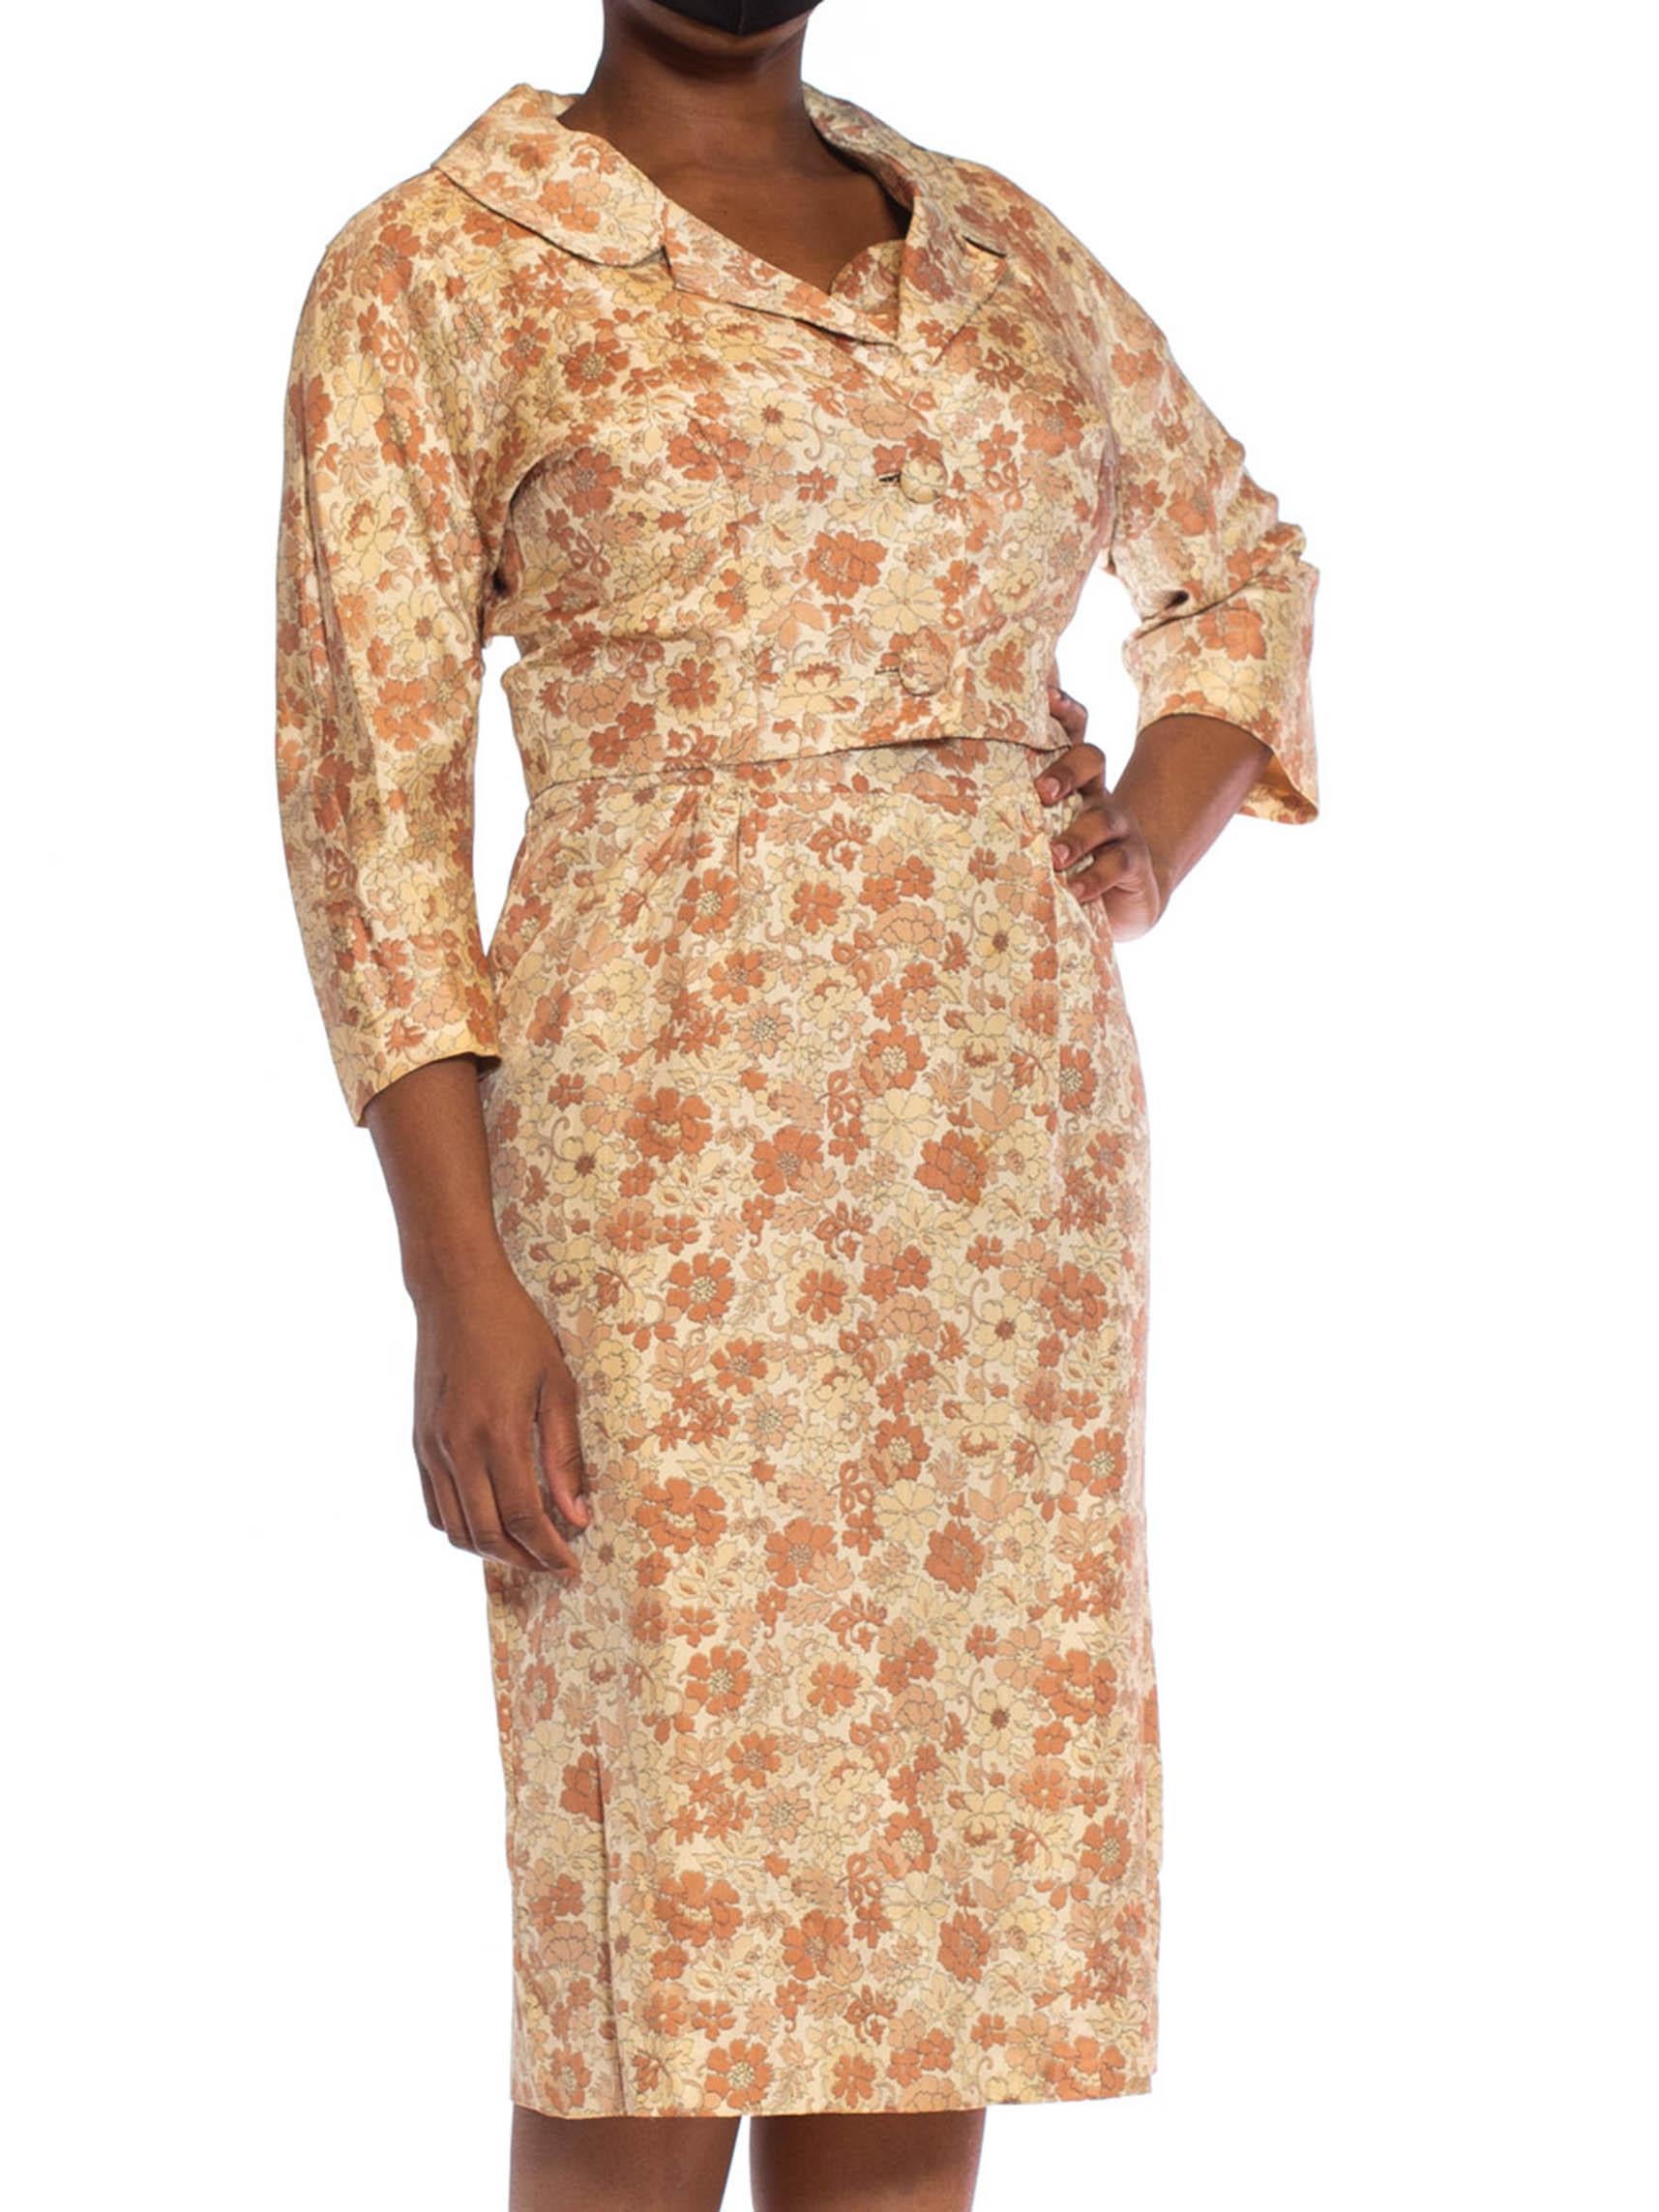 1950S Beige & Brown Silk Indian Floral Print Dress Jacket Ensemble In Excellent Condition For Sale In New York, NY